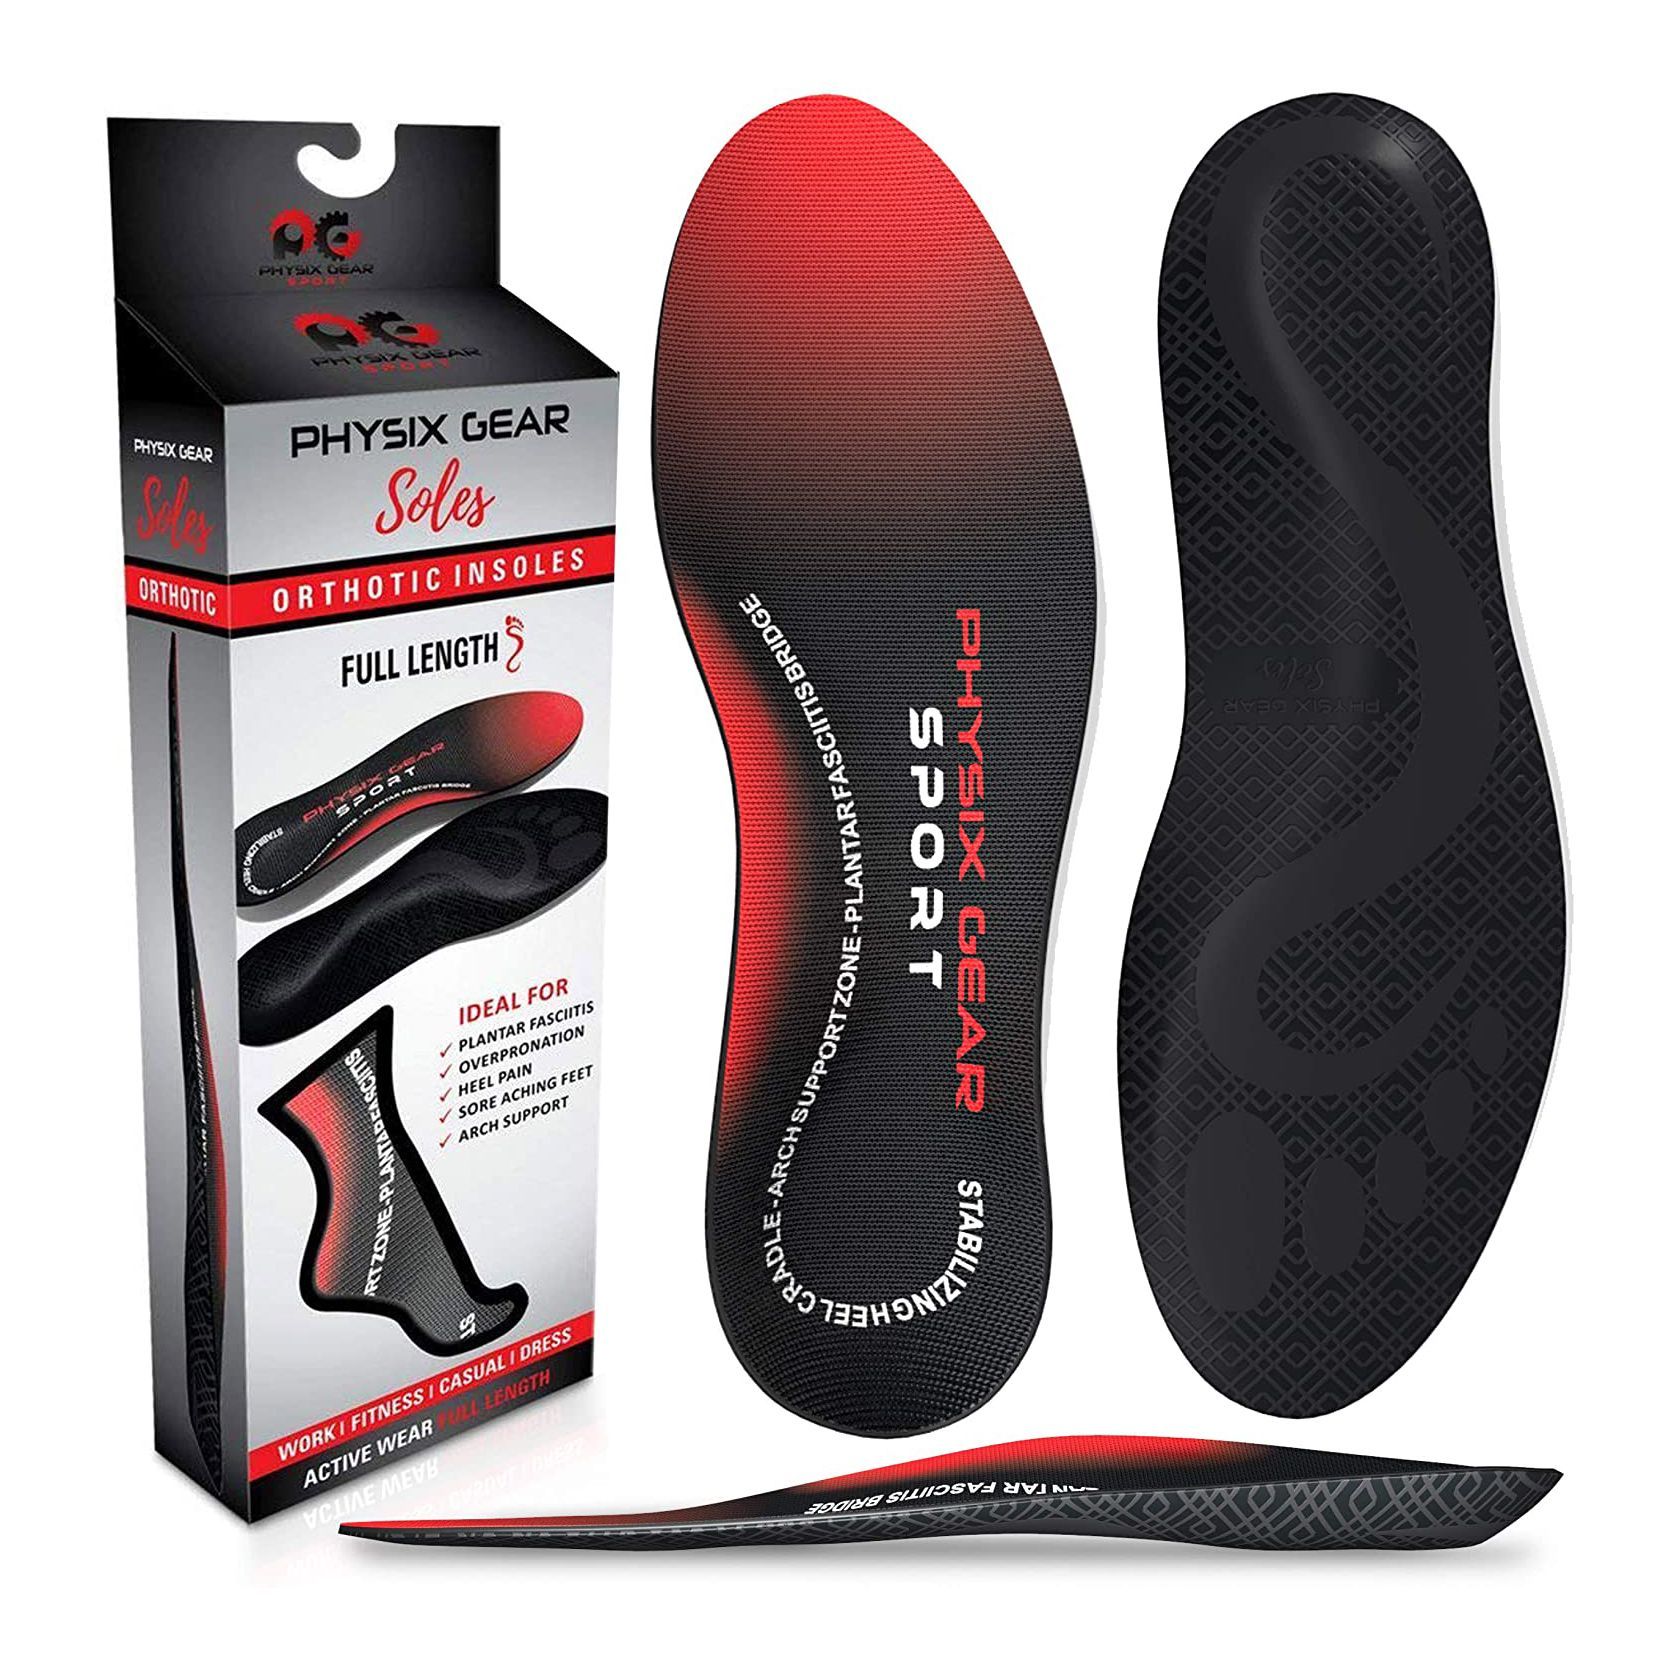 2 Pairs Cushioned Arch Support Plantar Fasciitis Support Flat Feet Insoles Spurs Plantar Fasciitis Orthotic Insoles Women Men Feet Pain Relief 